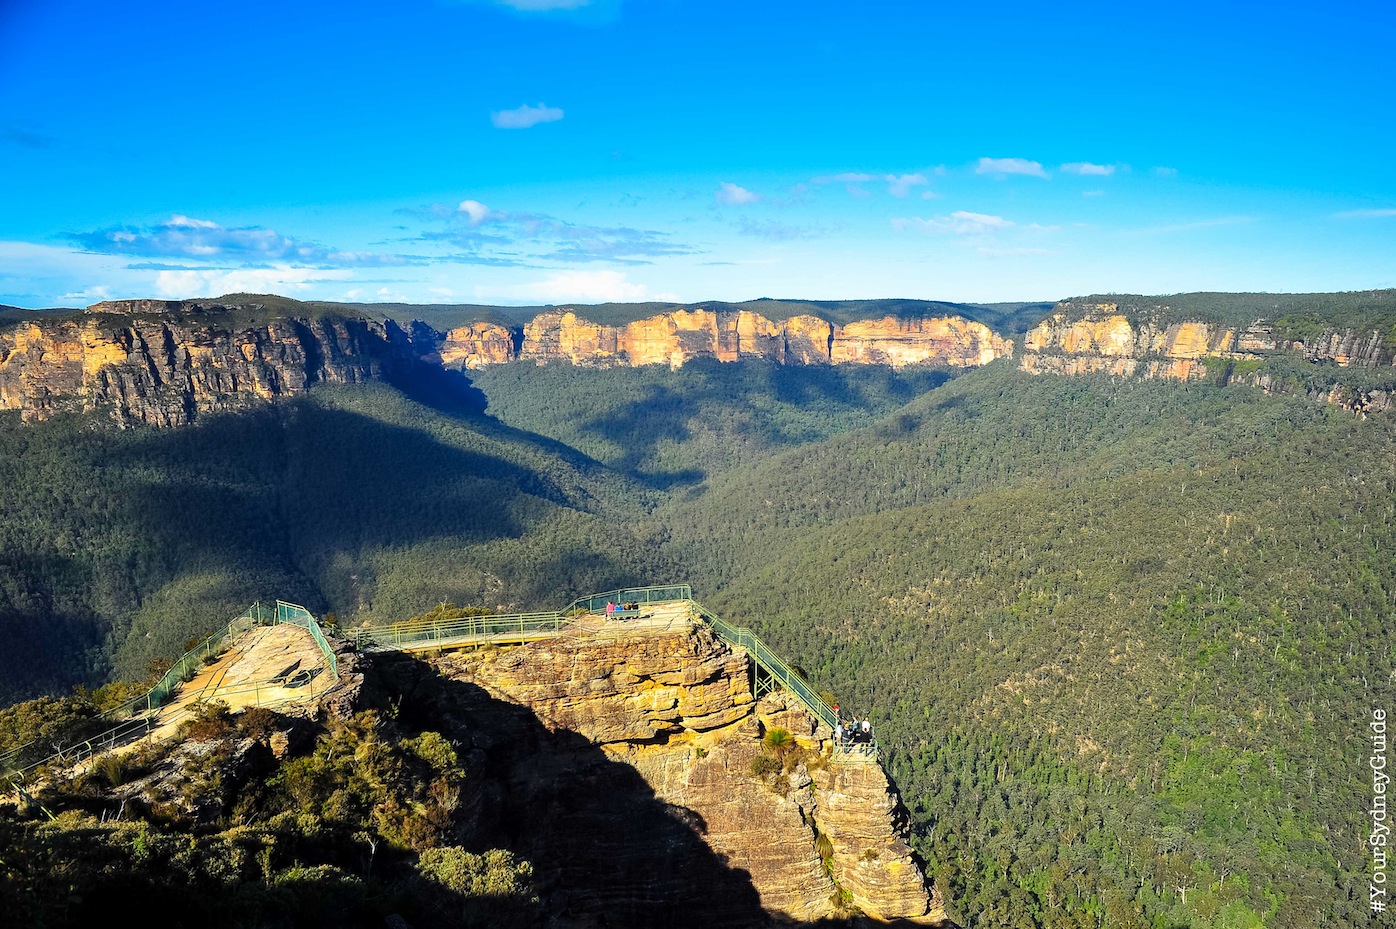 Into the Blue - Blue Mountains Private Full Day Tour